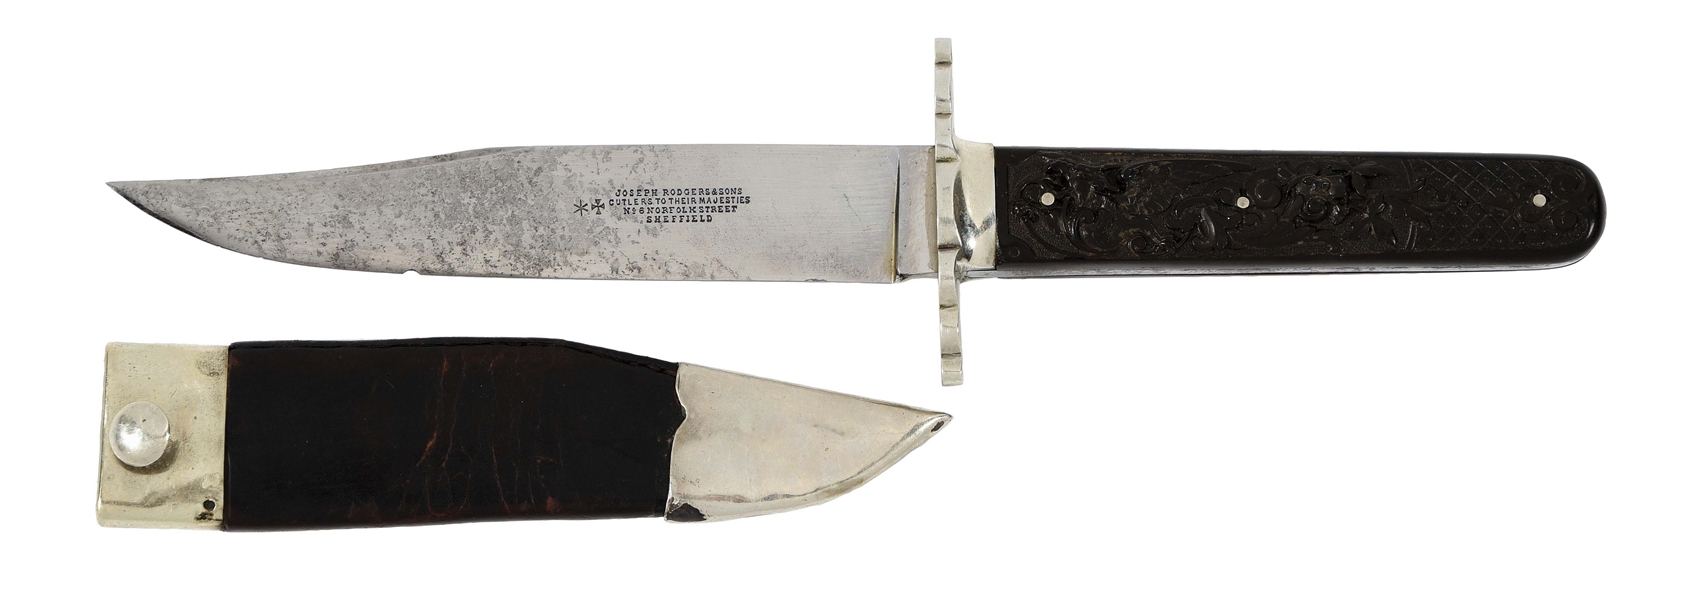 JOSEPH RODGERS & SONS CIRCA 1860S FIXED BLADE KNIFE WITH MAGNIFICENT HIGH RELIEF HANDLE DEPICTIONG FLYING GARGOYLES